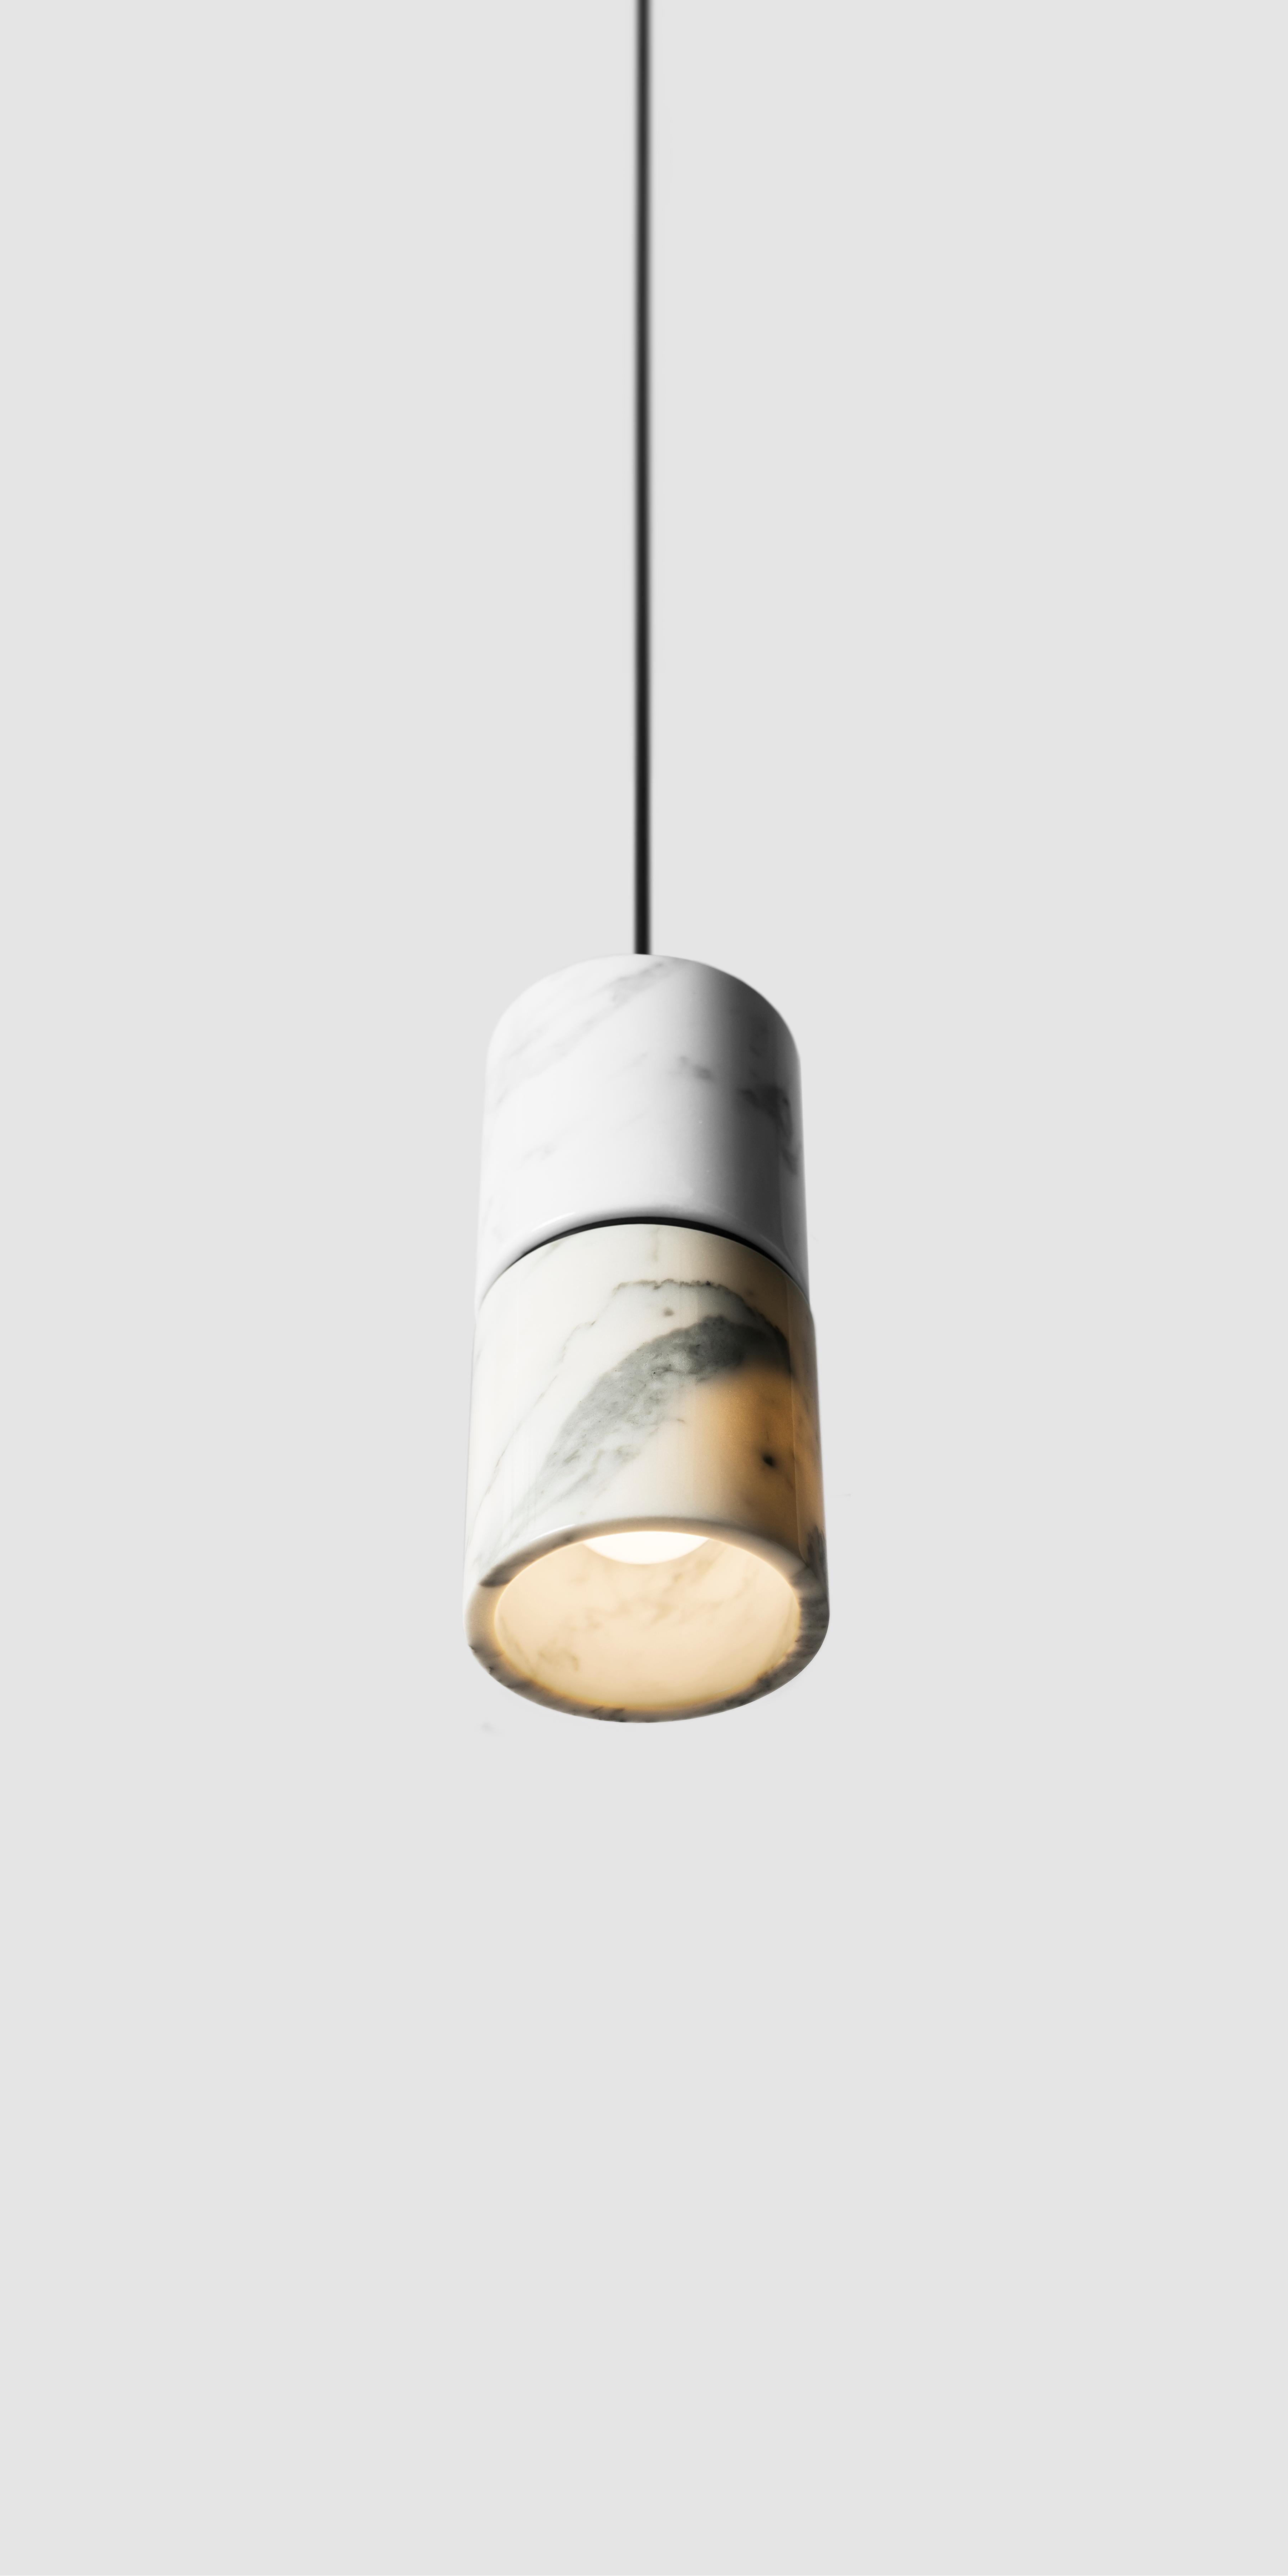 Pendant lamp 'RI' by Buzao x Bentu design. 
Black lava stone and white marble versions available.

(Sold individually)

Measures: 26.5 cm high; 10 cm diameter
Wire: 2 meters black (adjustable)

Brass (gold) or aluminum (black) finish.

Lamp type: